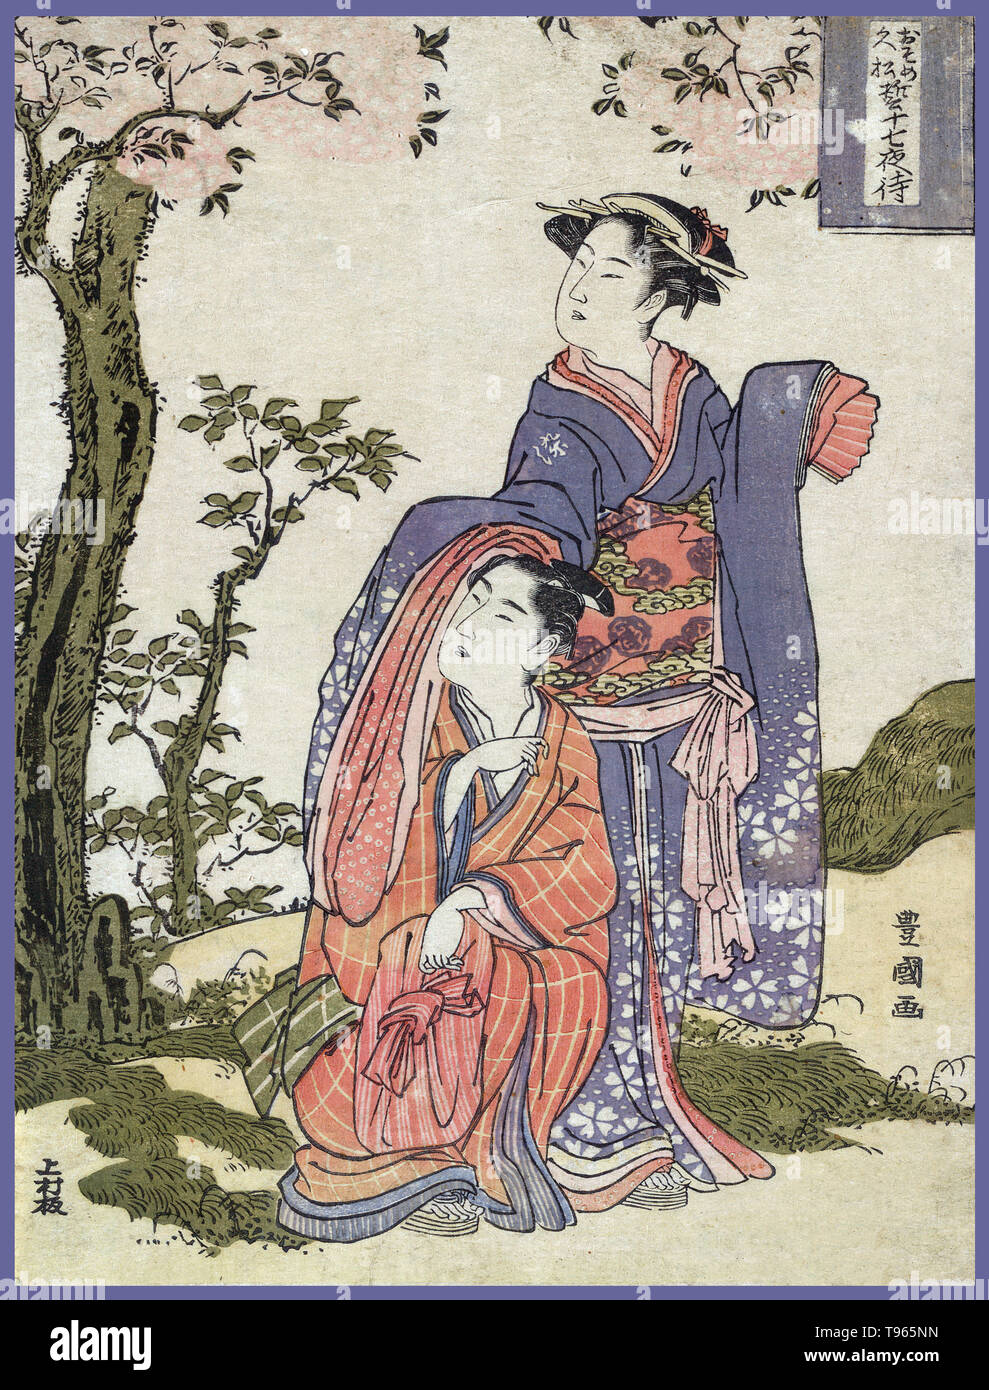 Osome hisamatsu chikai no jushichiya machi. The couple Osome and Hisamatsu viewing the mid-August moon. Ukiyo-e (picture of the floating world) is a genre of Japanese art which flourished from the 17th through 19th centuries. Ukiyo-e was central to forming the West's perception of Japanese art in the late 19th century. From the 1870s Japonism became a prominent trend and had a strong influence on the early Impressionists, as well as Post-Impressionists and Art Nouveau artists. Stock Photo